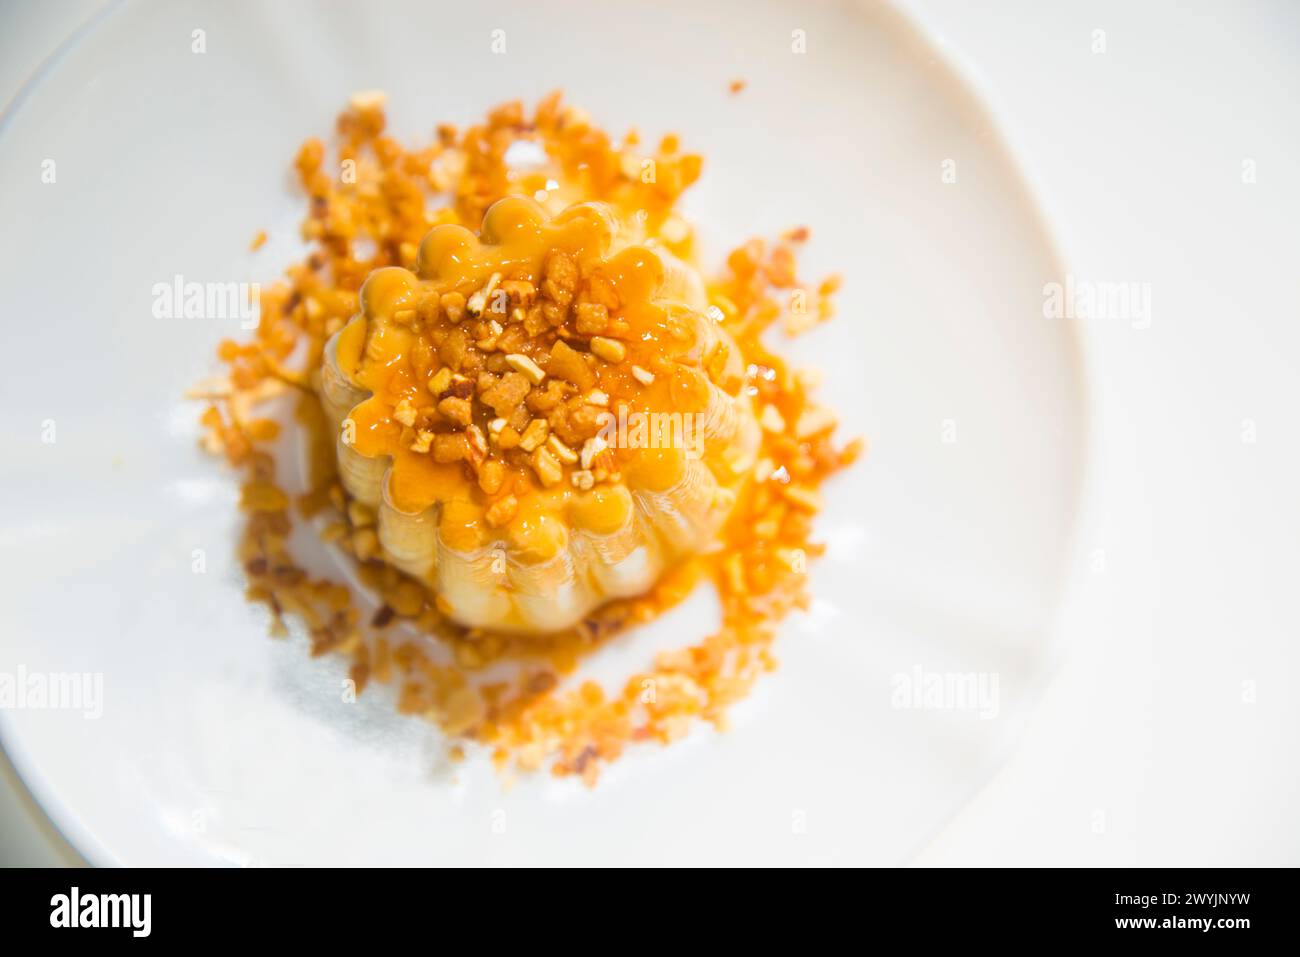 Creme caramel with chopped almonds. View from above. Stock Photo